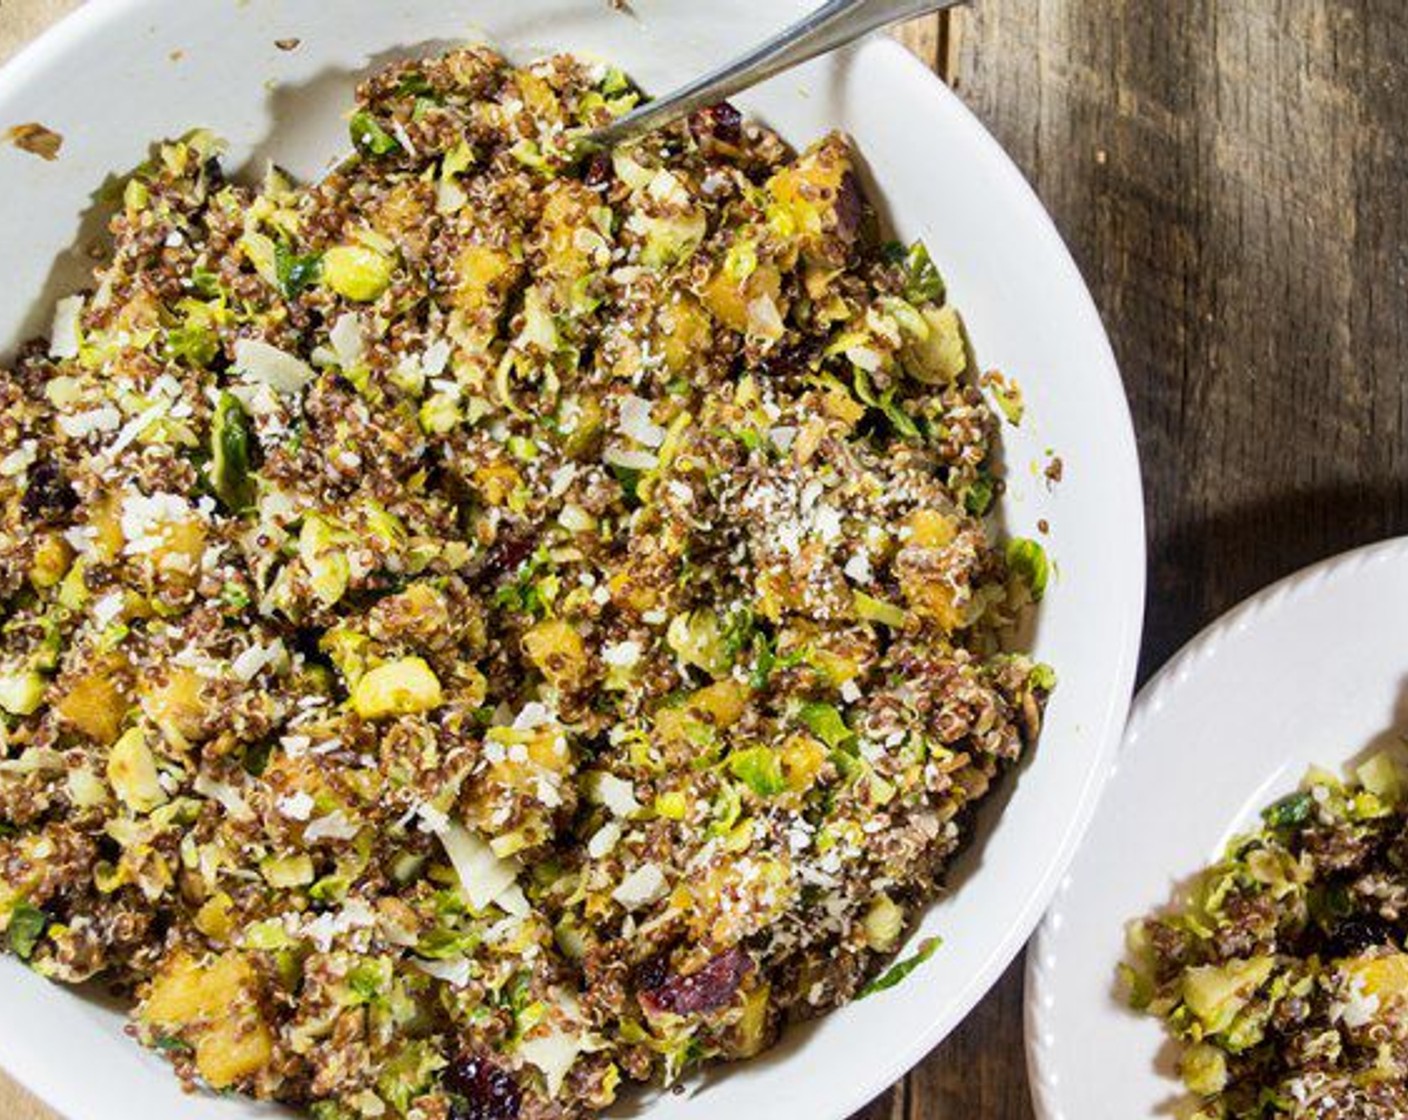 step 7 In a large bowl, combine quinoa, brussels sprouts, acorn squash mix, and Parmesan Cheese (1/2 cup), toss and serve with extra parmesan cheese, if desired. Eat!